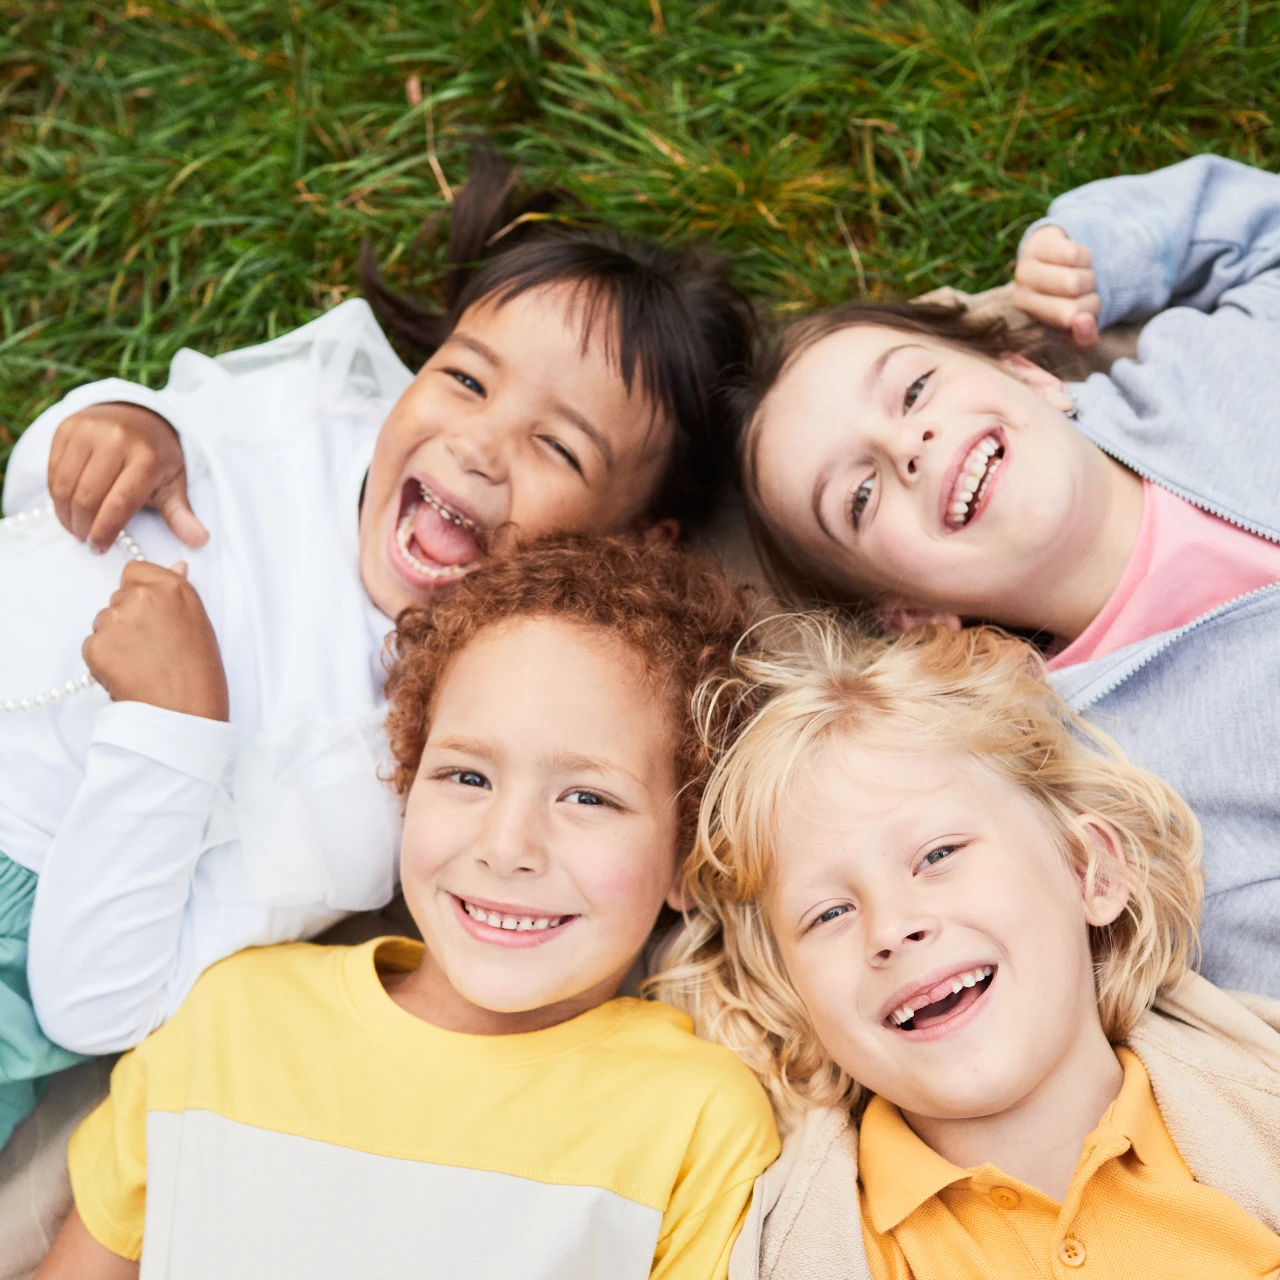 children smiling after going to the dentist | pediatric dentistry in Redondo Beach, CA